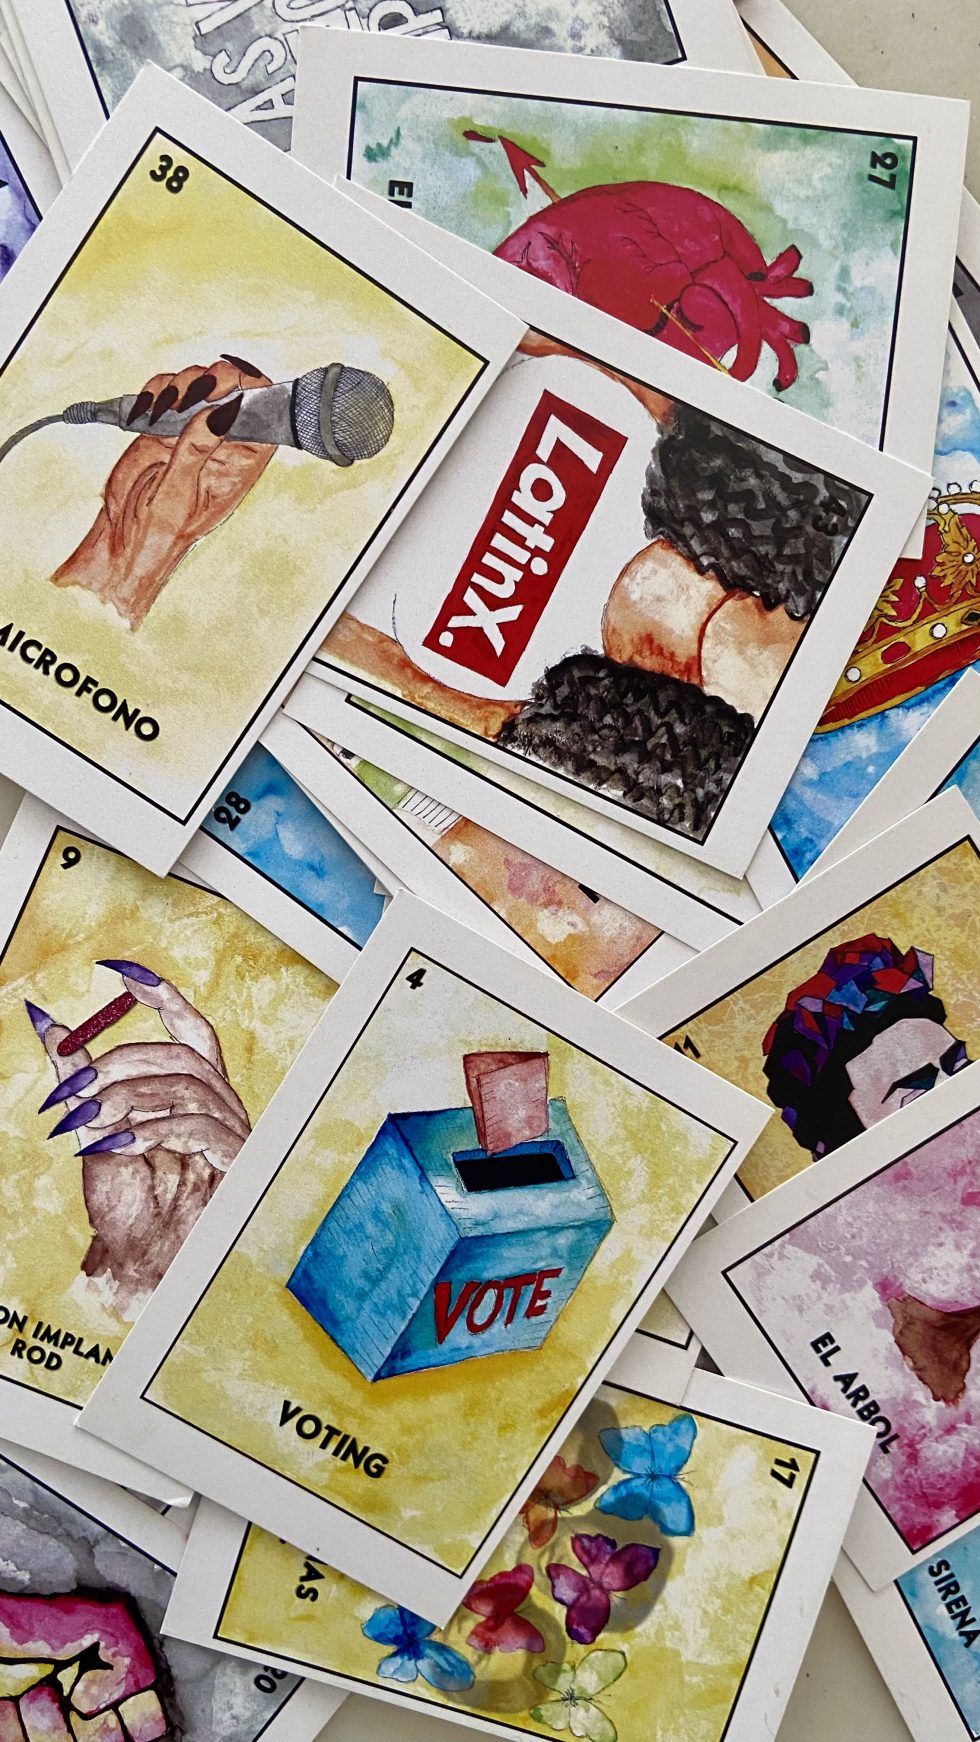 Stephanie Guillermina Castro's Reproductive Justice Lotería cards with voting, microfono, and LatinX cards showing